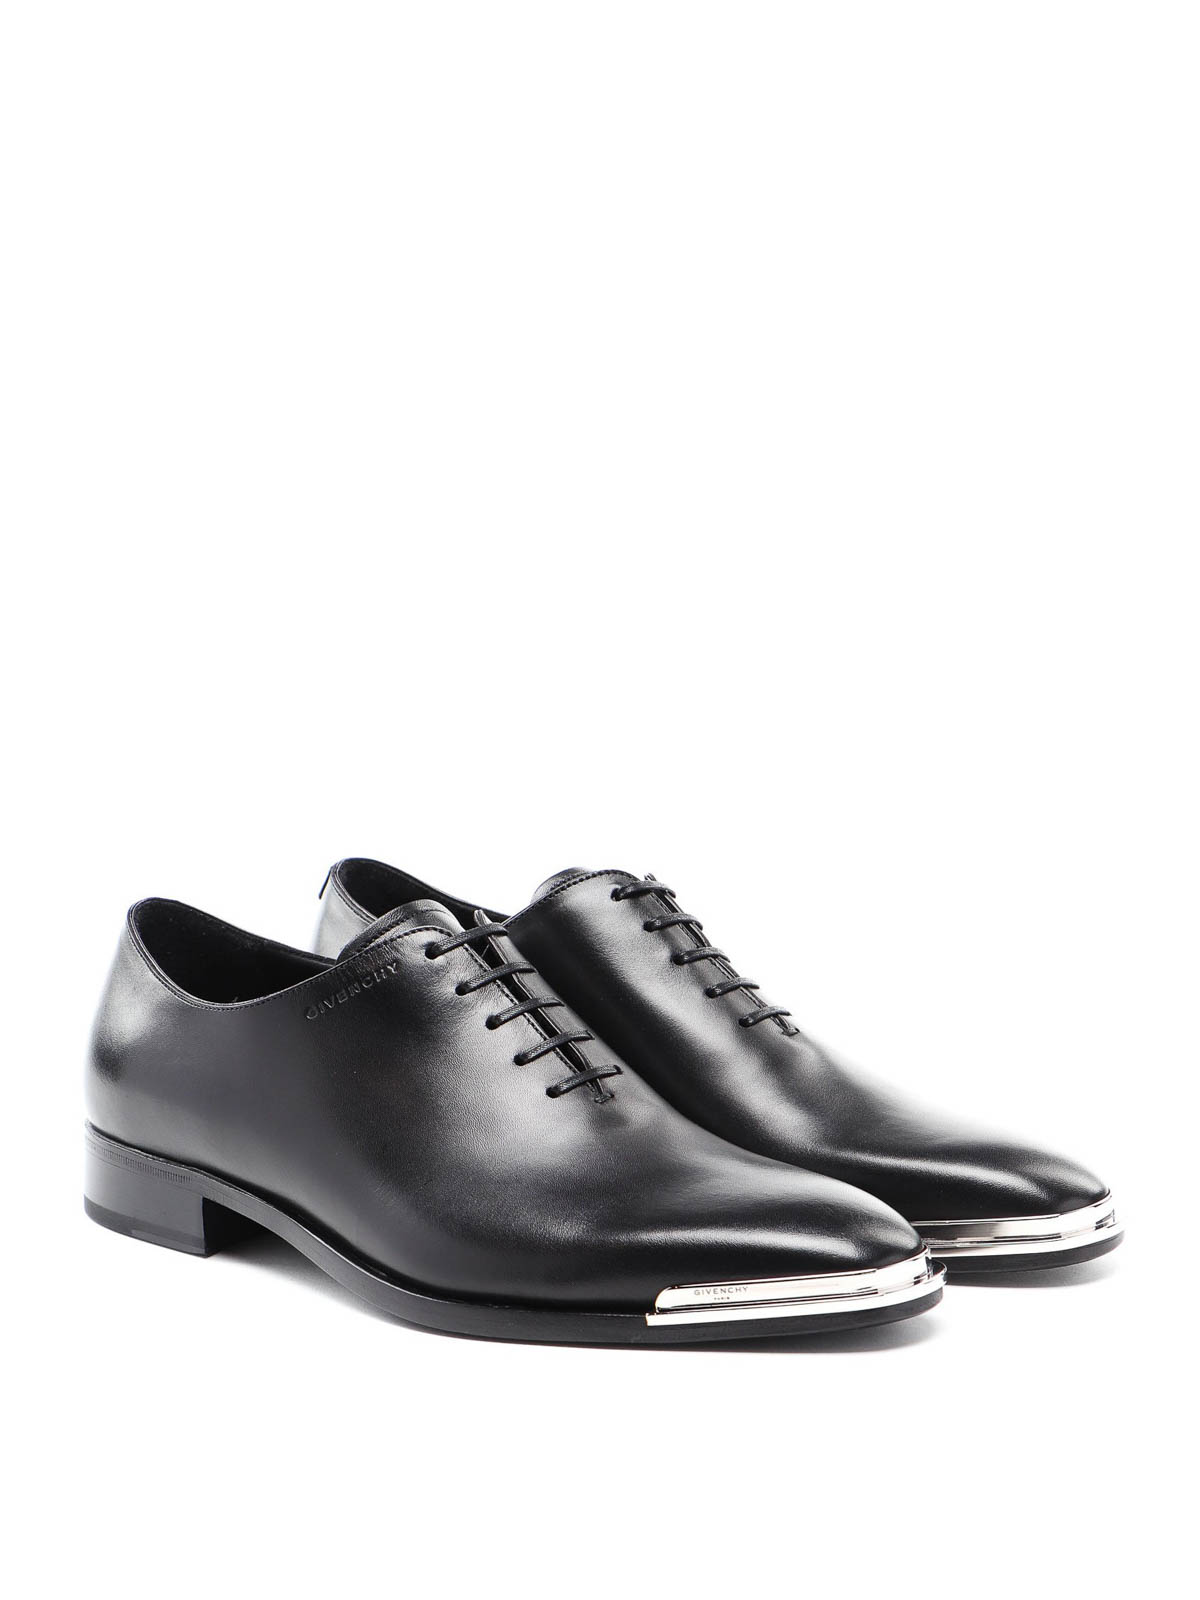 Givenchy - Black leather Oxford shoes 